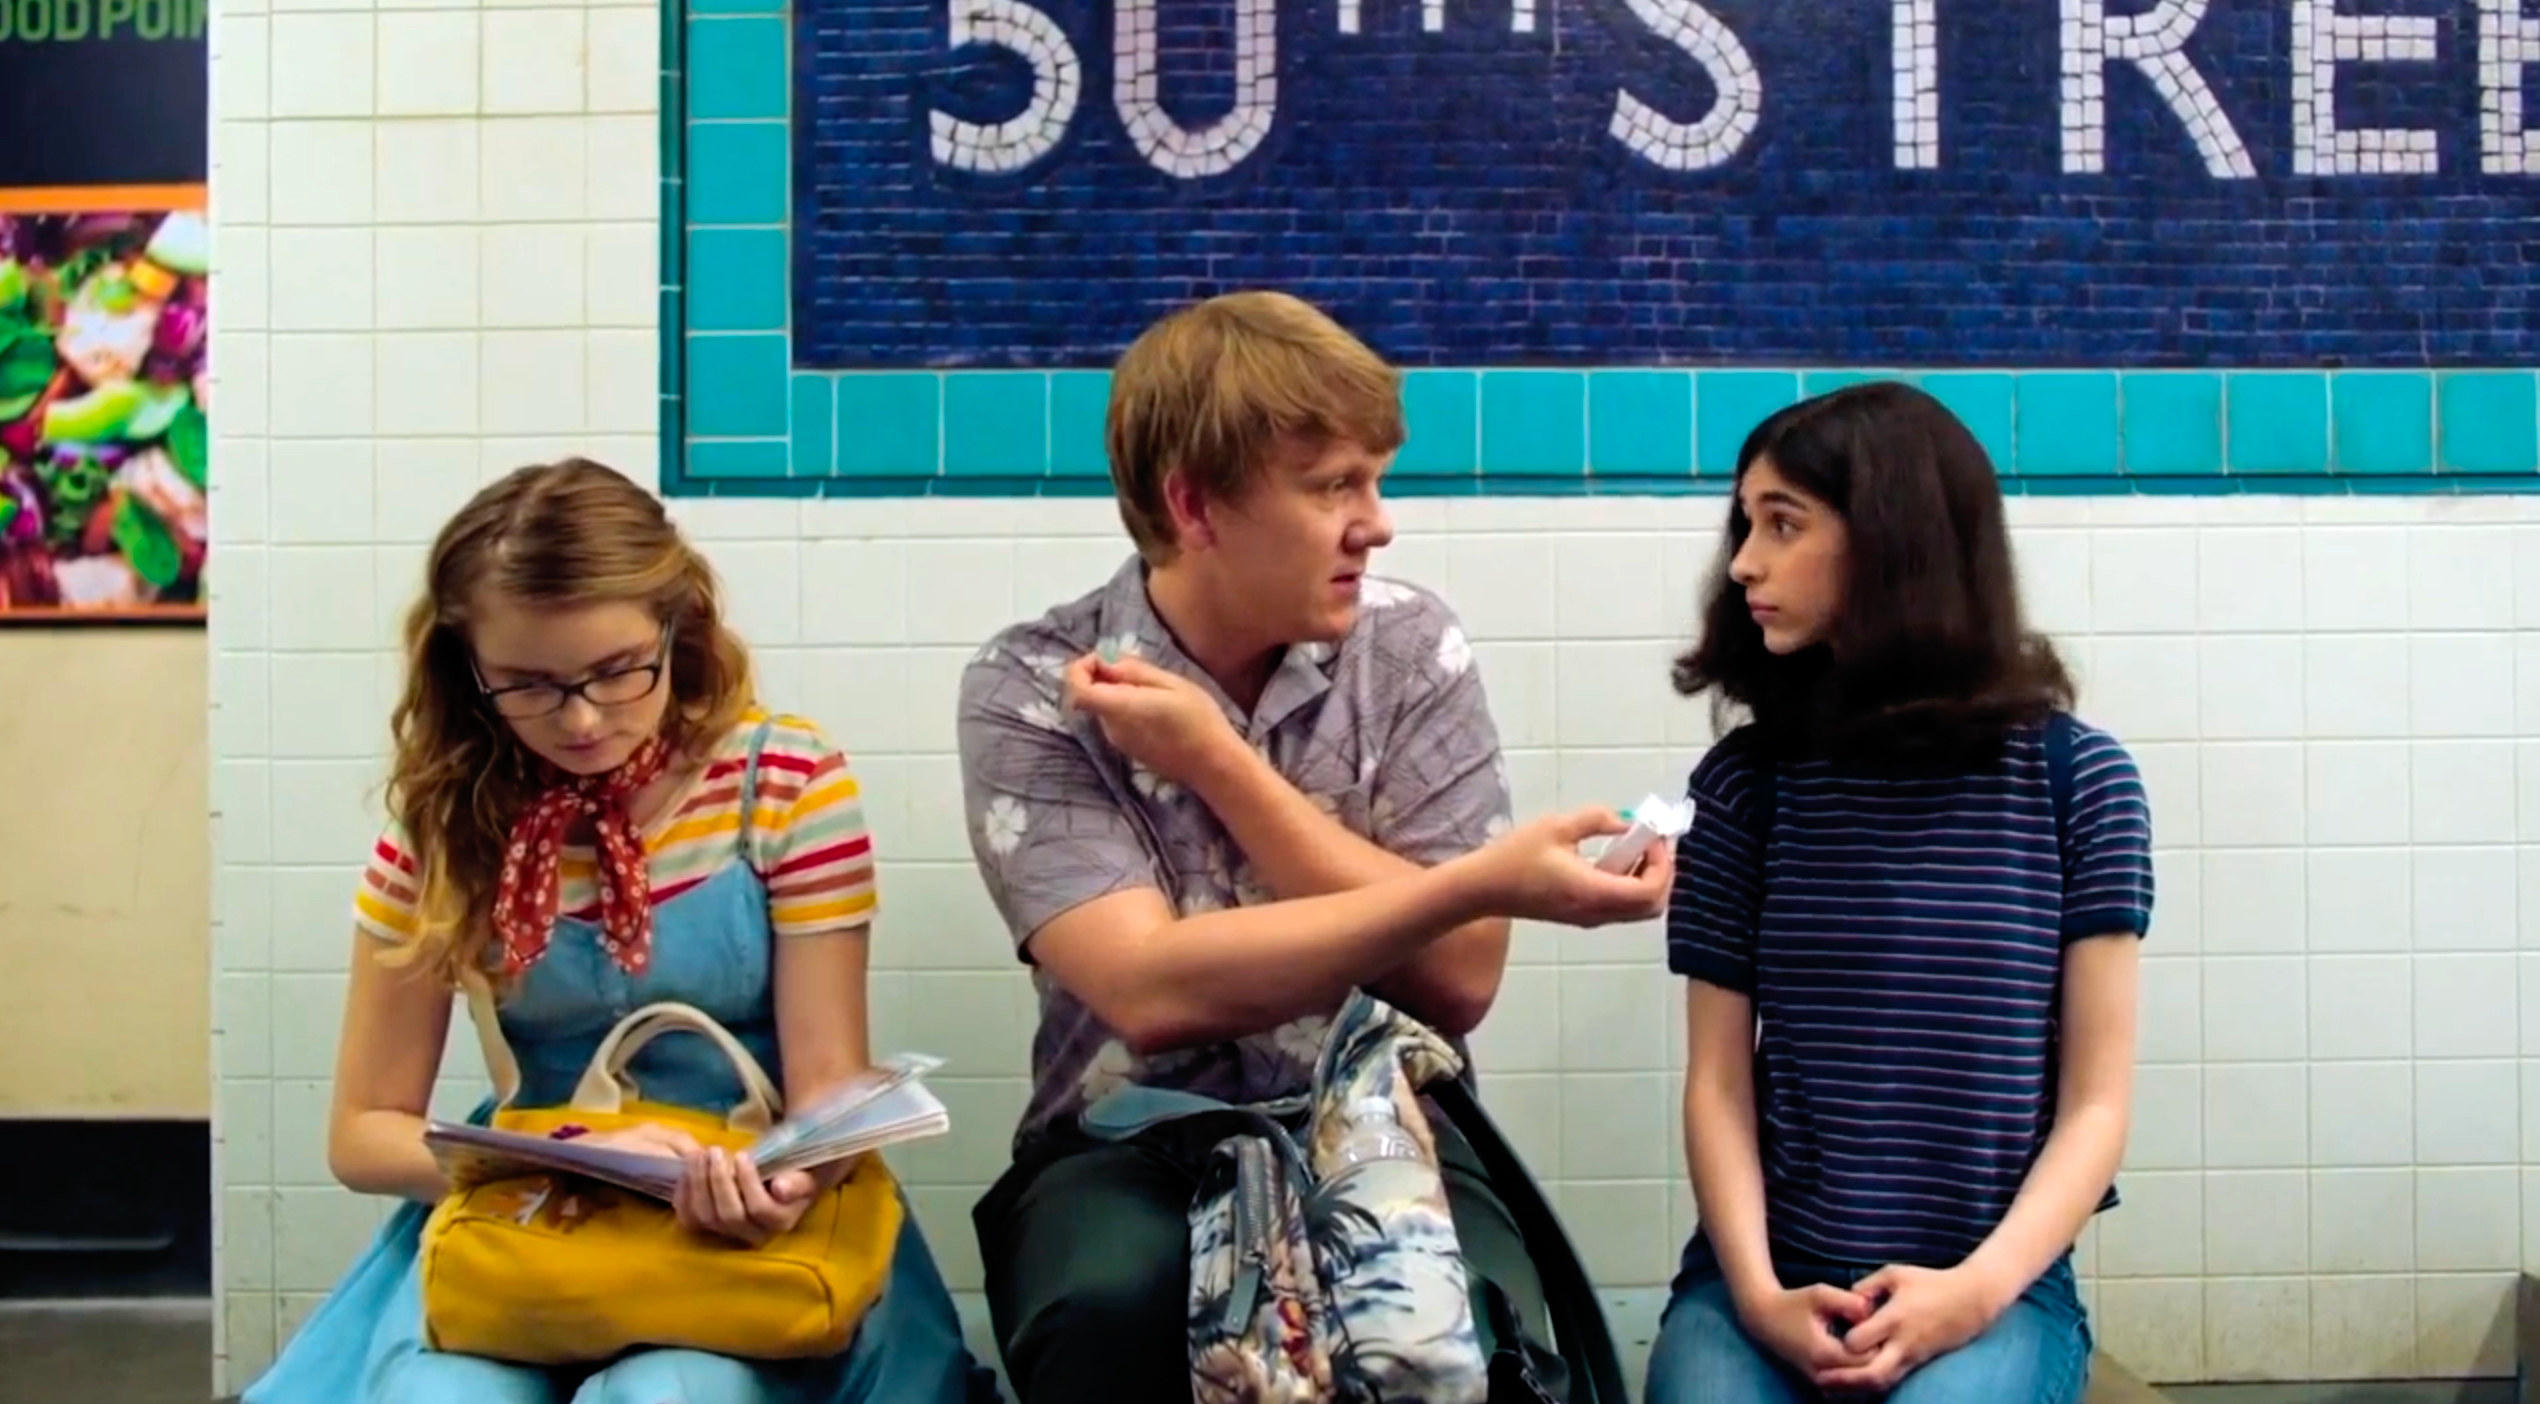 In a screenshot from the finale, the three siblings sit on a bench in a subway station in New York. From left to right are Matilda, Nicholas and Genevieve. Matilda is looking down at a book in her lap, and Nicholas is offering Genevieve dental floss.